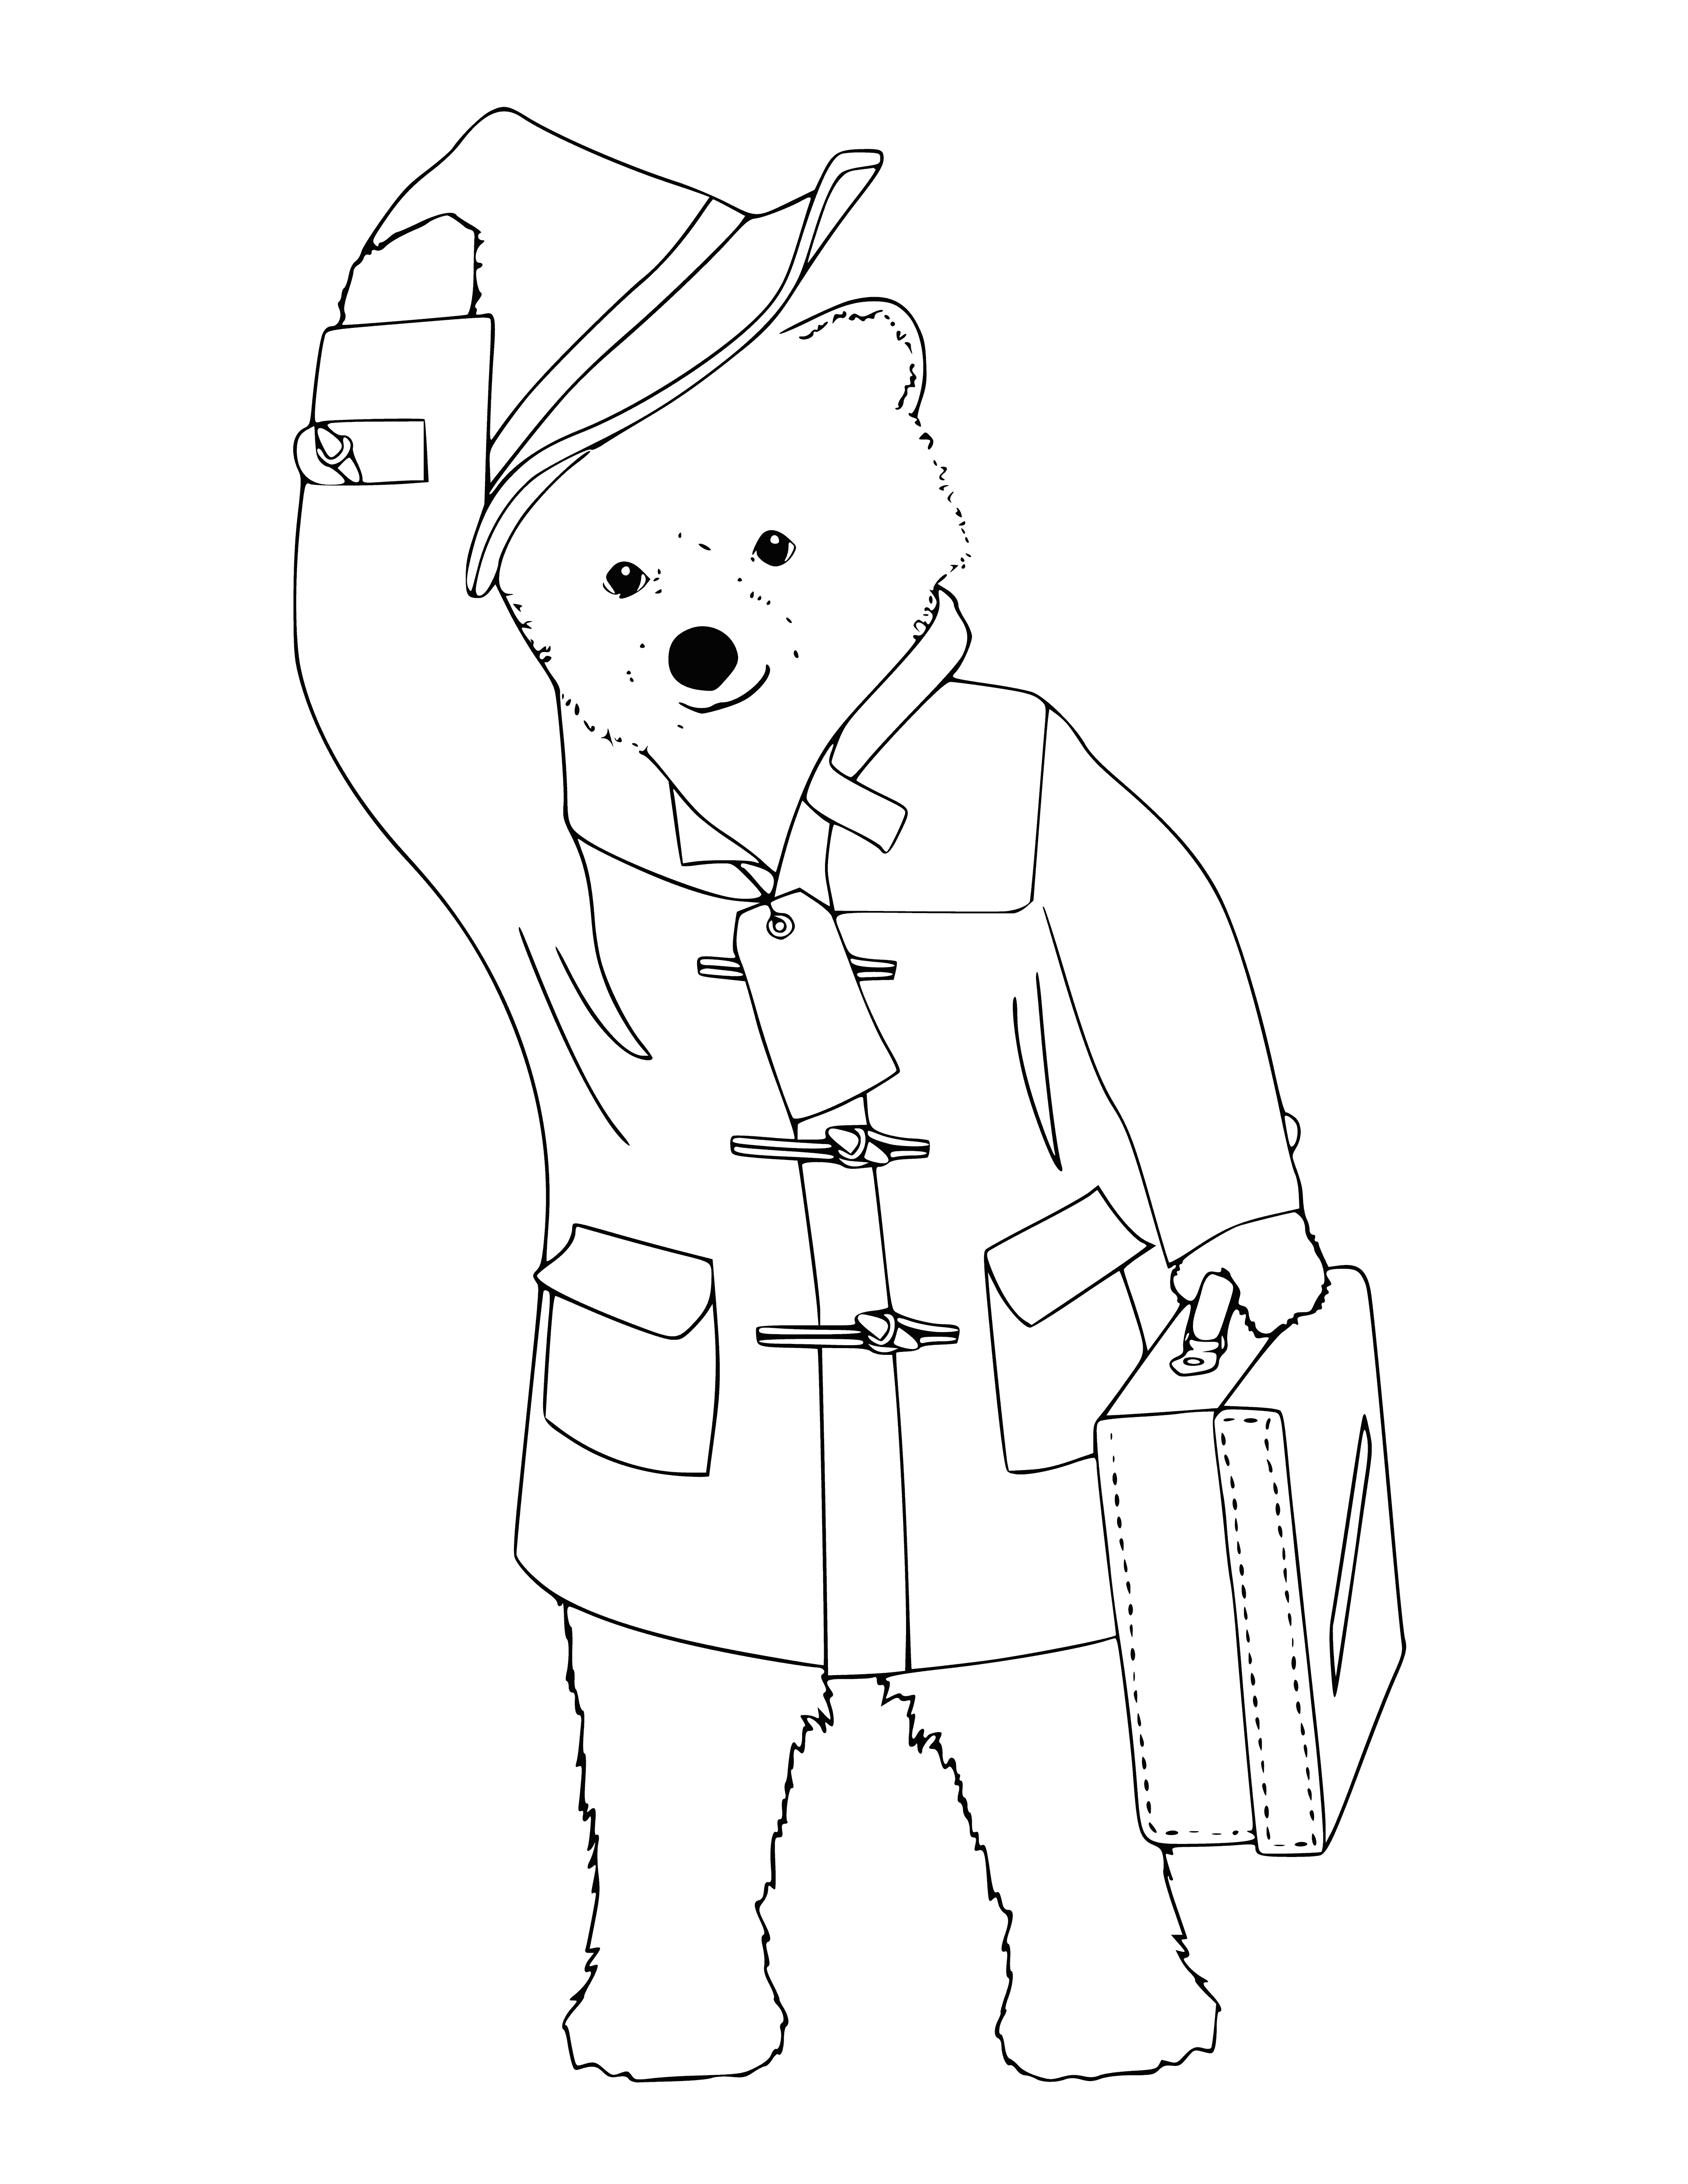 coloring page: Paddington Bear arrives to London from Peru, politely bringing the Brown family strange surprises.